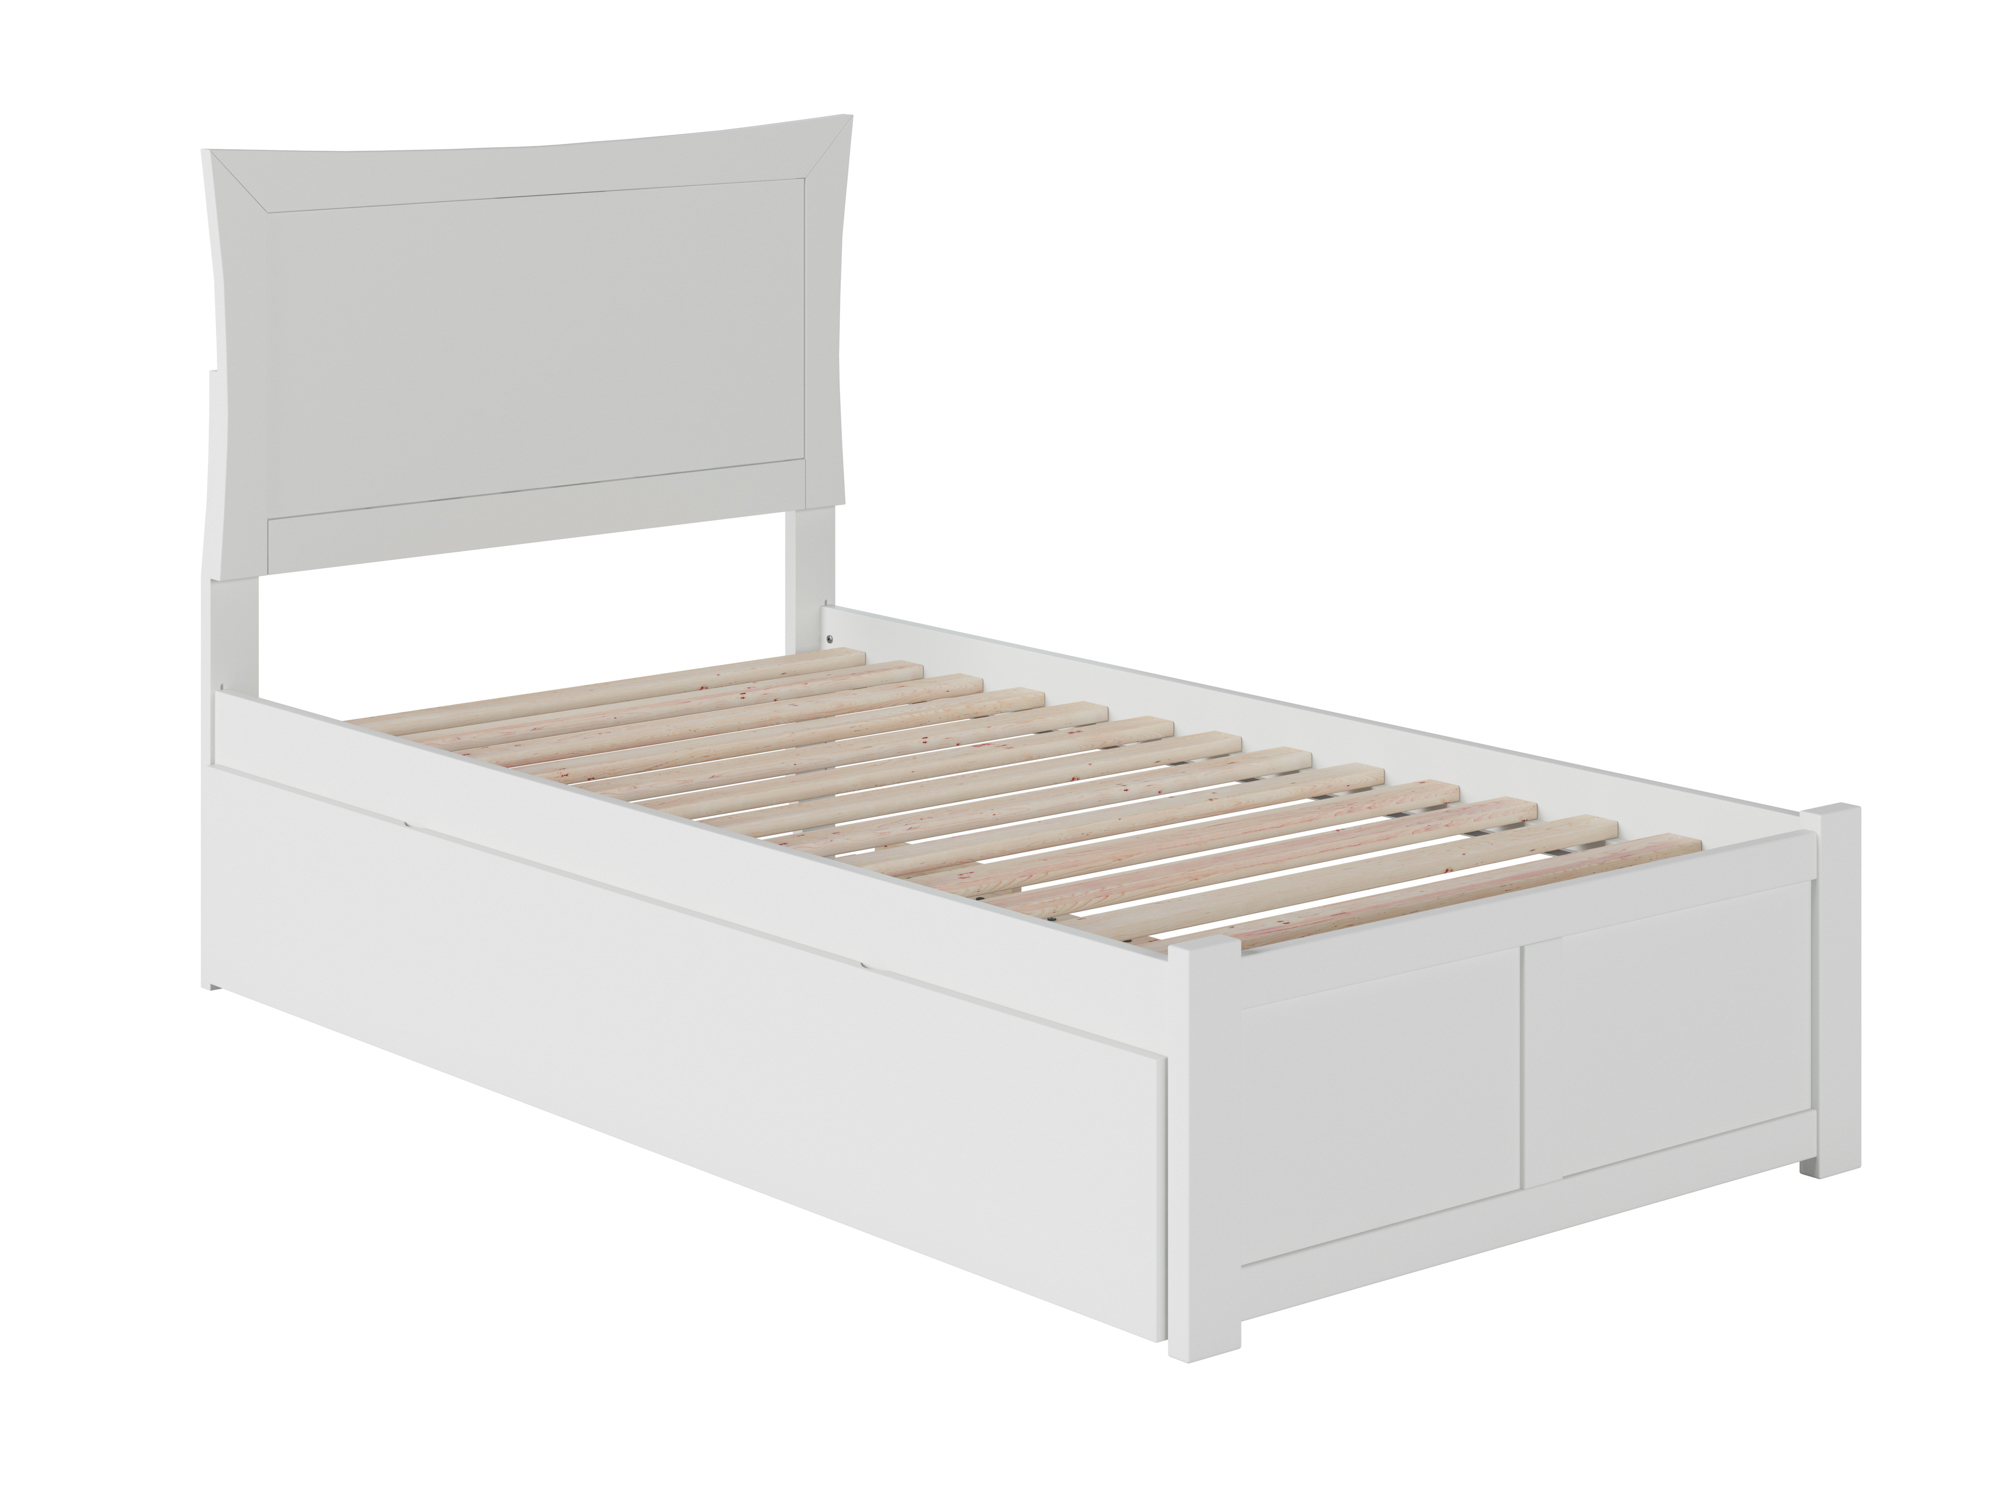 Metro Twin Extra Long Bed with Footboard and Twin Extra Long Trundle in White - image 1 of 7